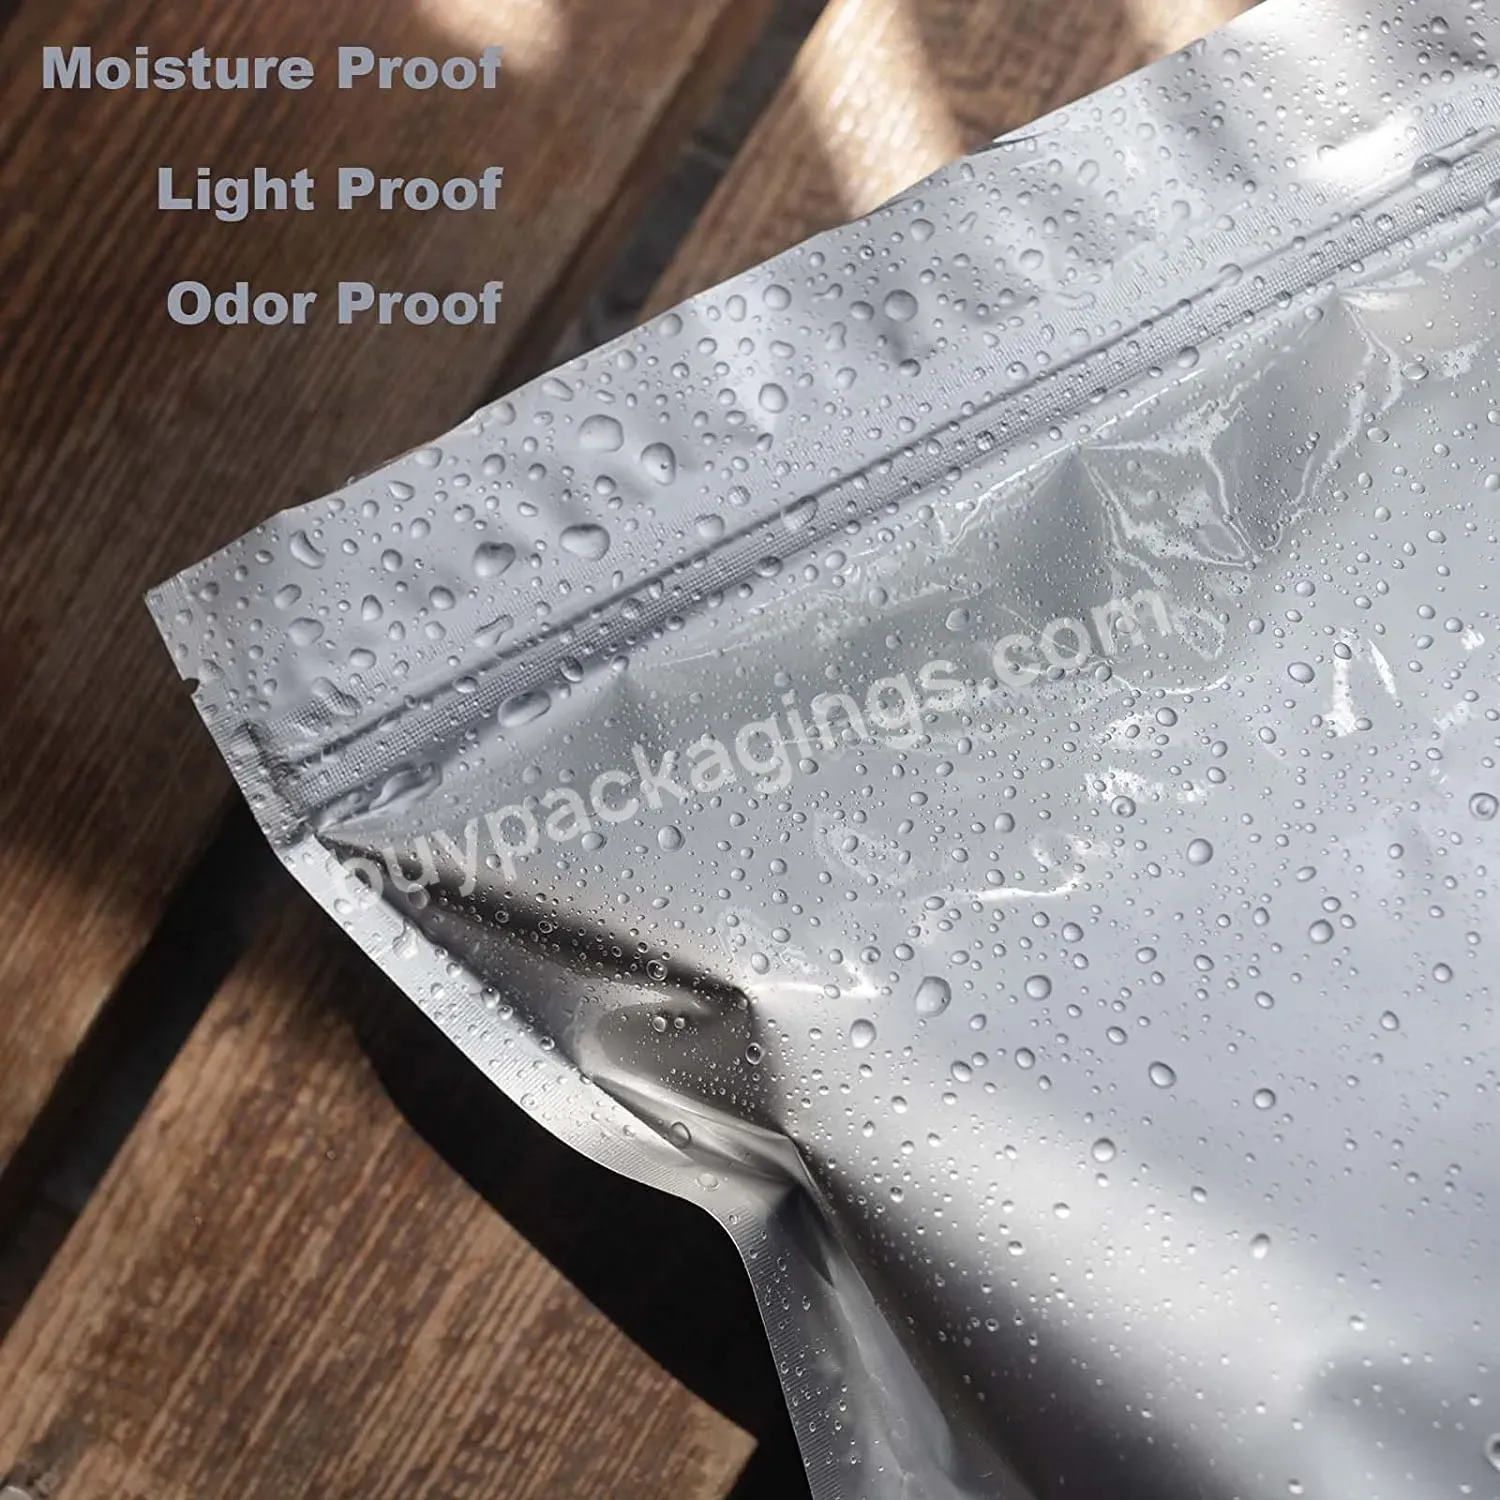 Custom Packaging Three Side Seal Aluminum Vacuum 1 Gallon 10*14 Inch Mylar Bags For Food Storage With Oxygen Absorber 300cc - Buy Mylar Bags,Bag For Kindling Wood,Resealable Mylar Bags.